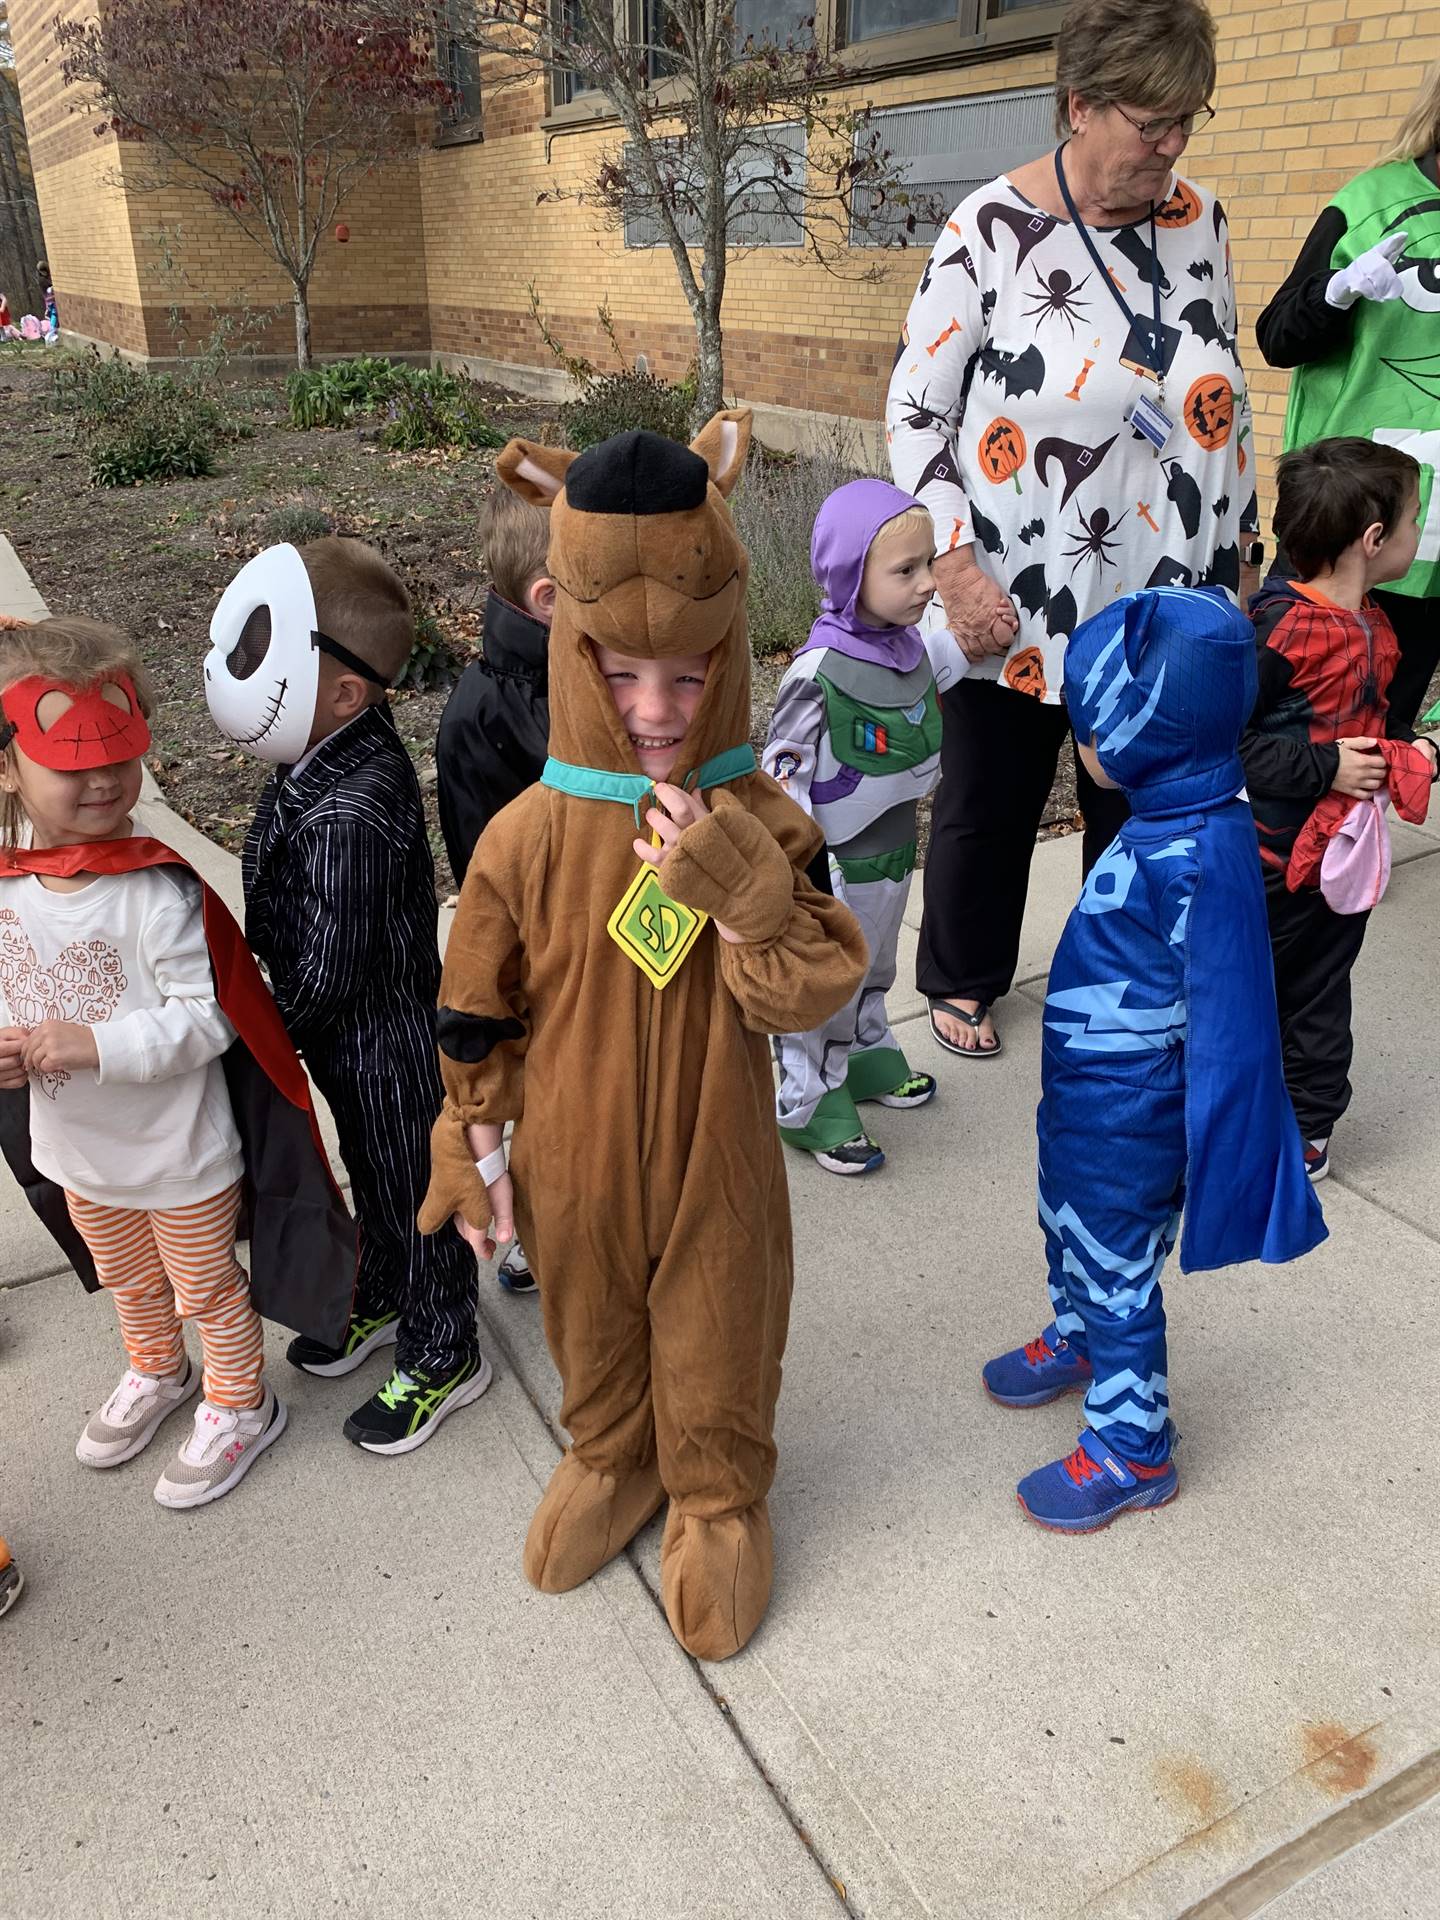 A scooby doo student with other students dressed up. 